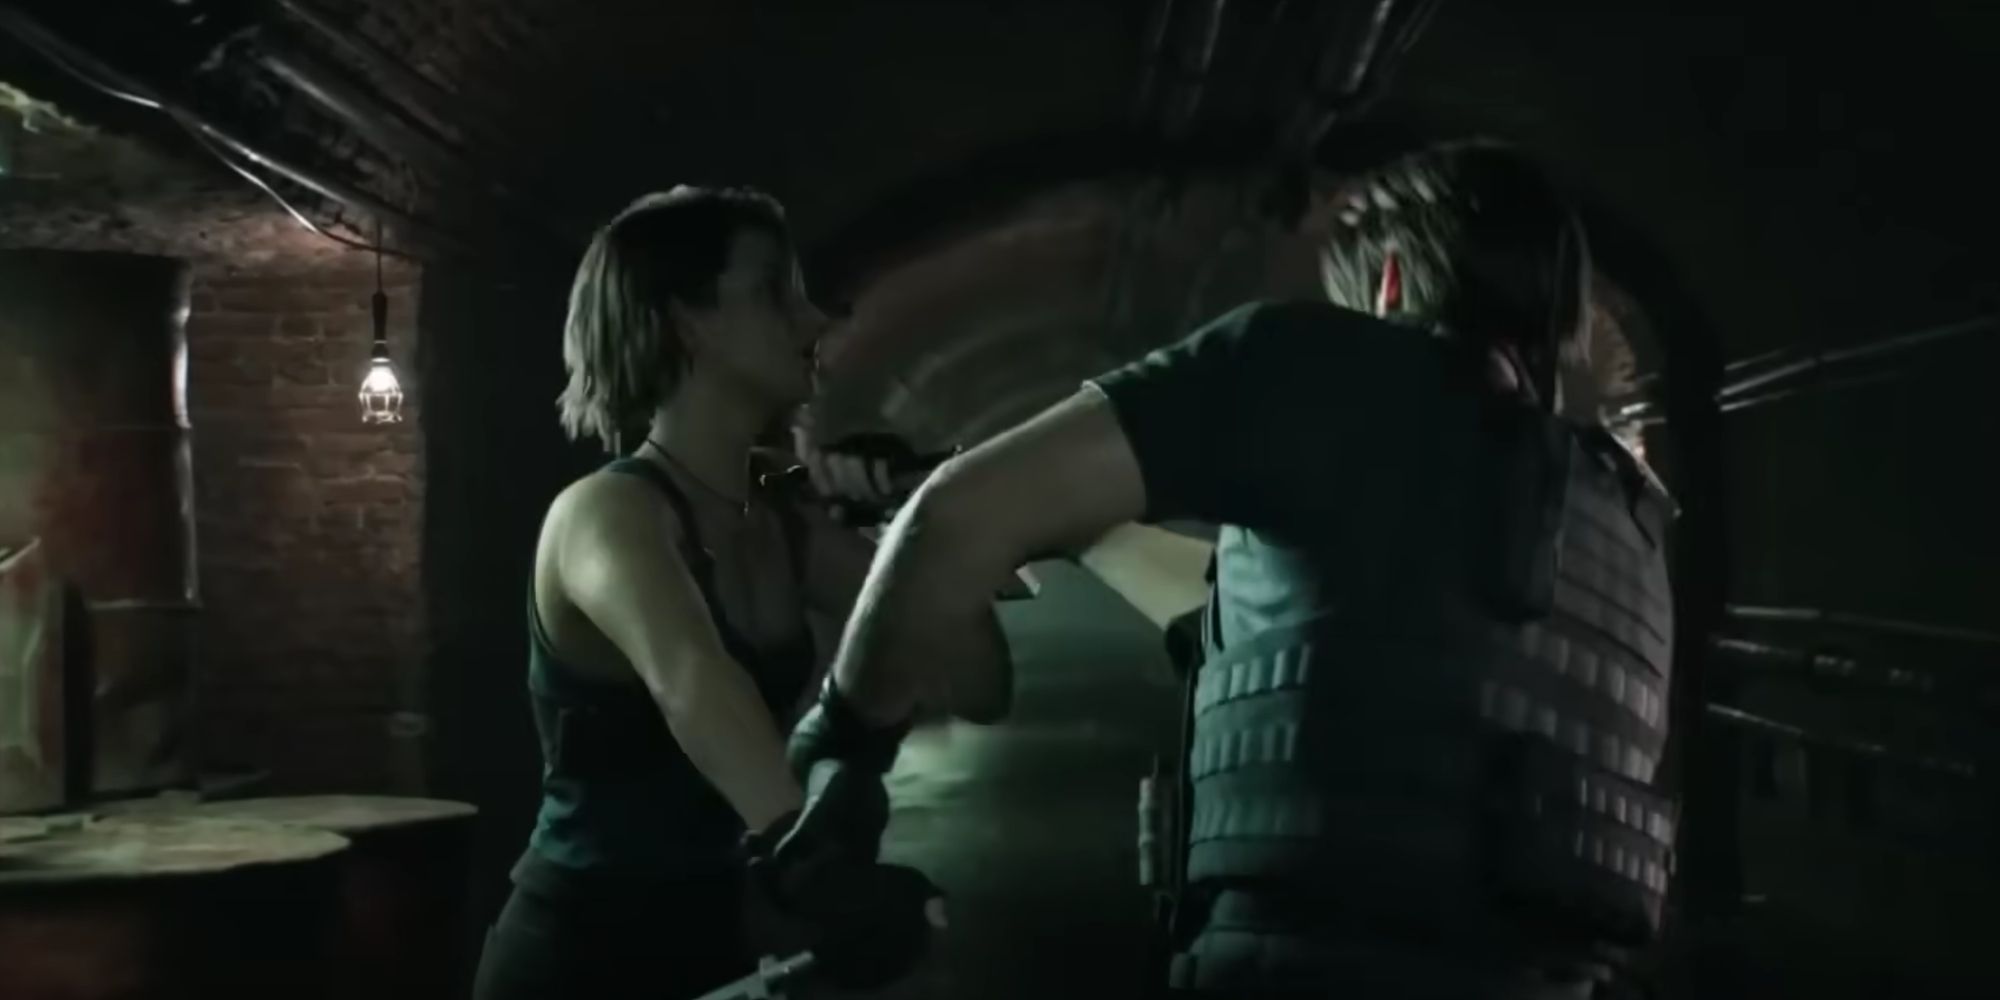 Jill and Leon surprise each other in Resident Evil Death Island and after meeting for the first time, they take each other's swords in a brief brawl.